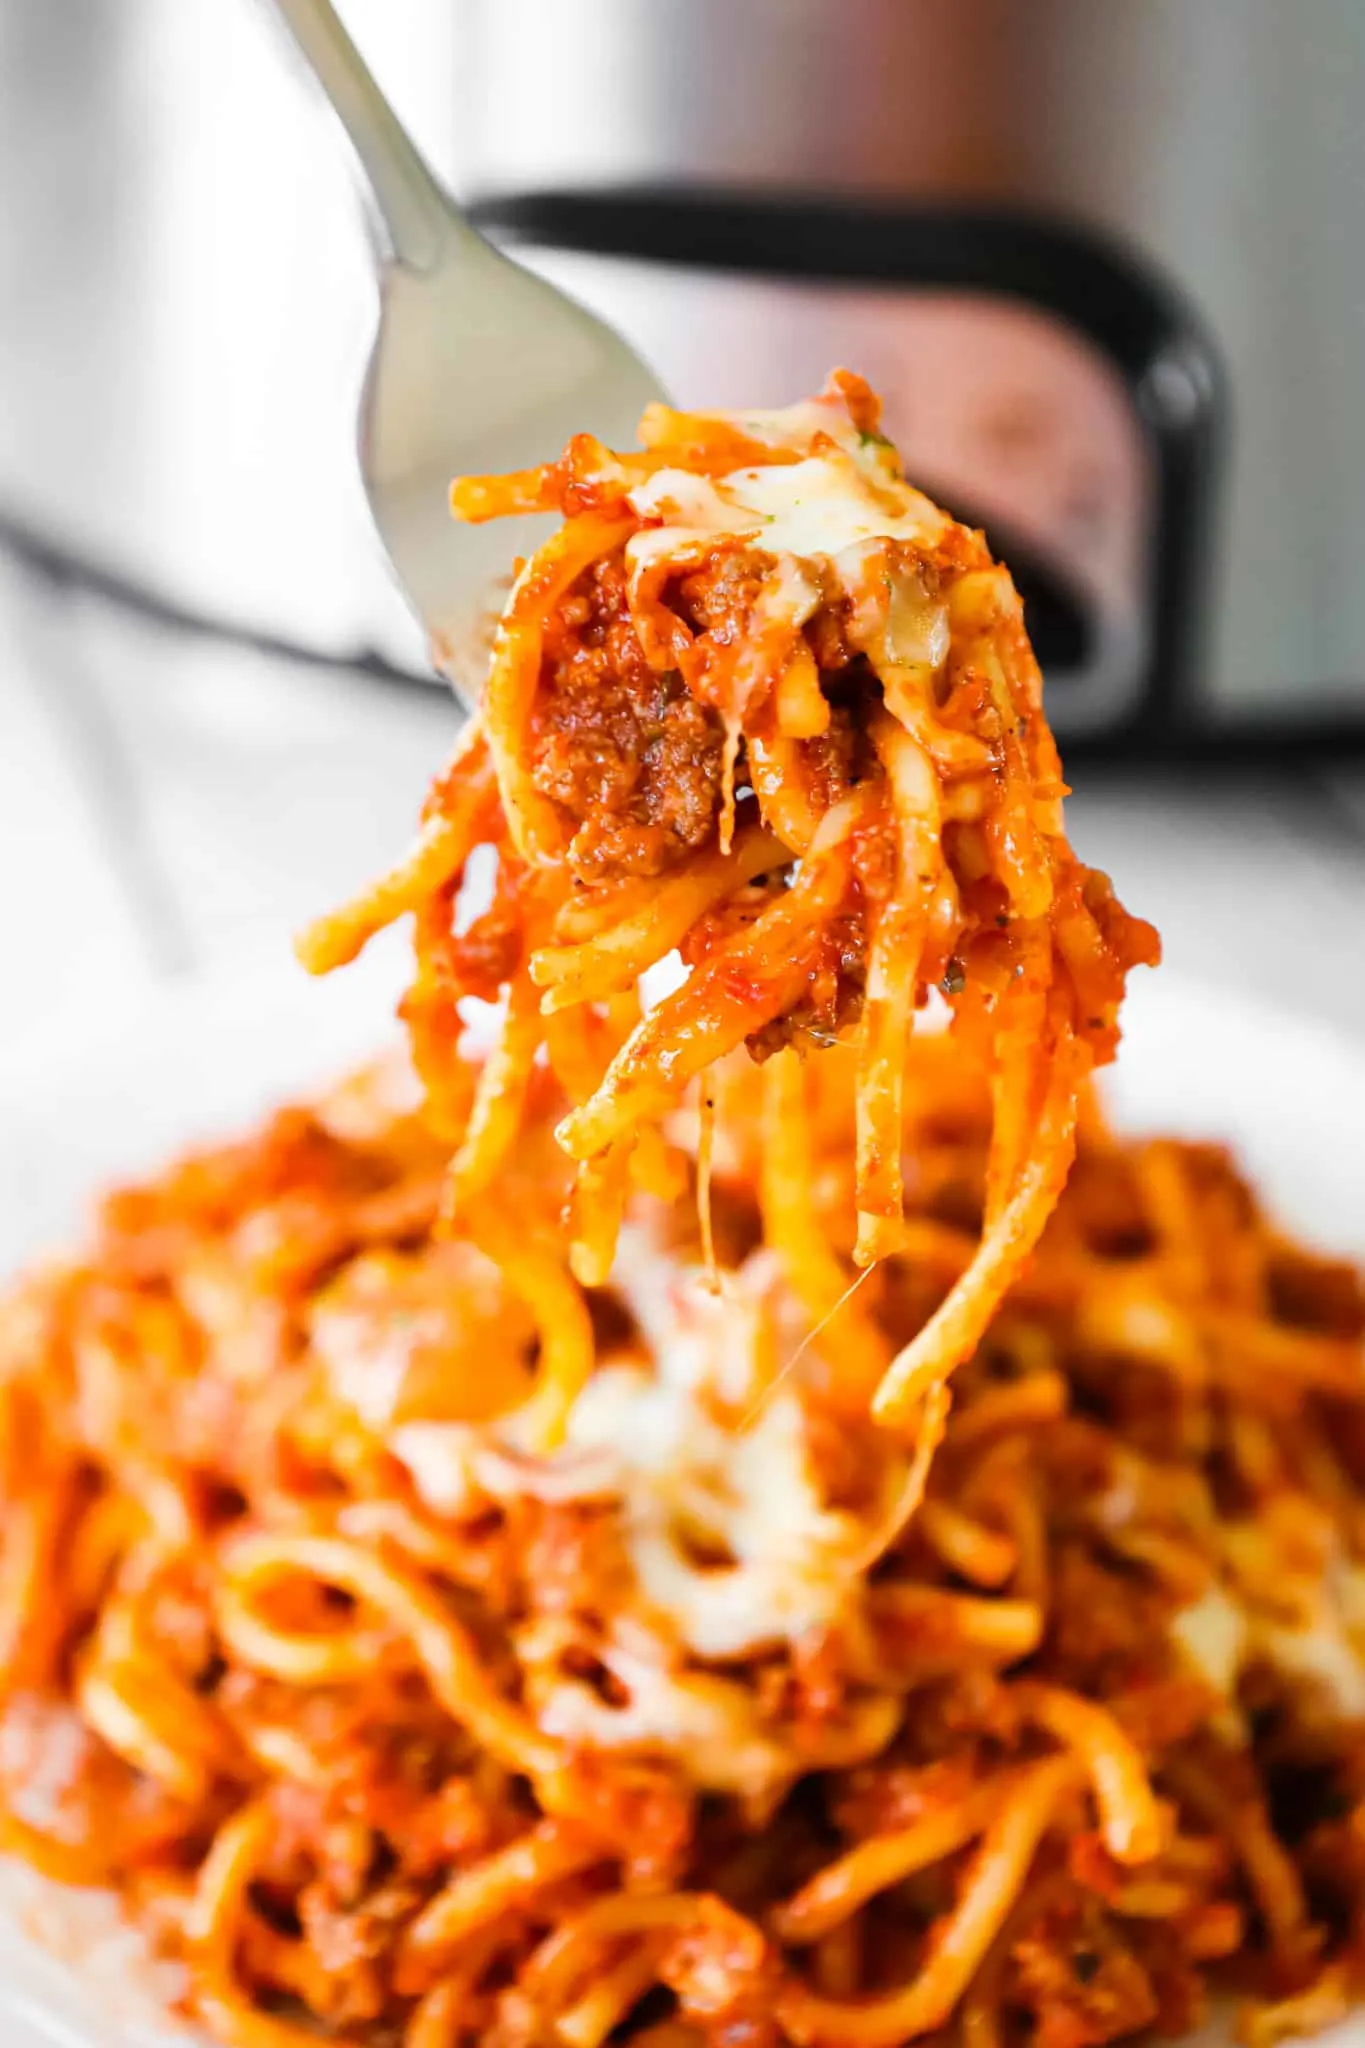 Crock Pot Spaghetti is a hearty slow cooker pasta recipe loaded with ground beef, marinara sauce and cheese.